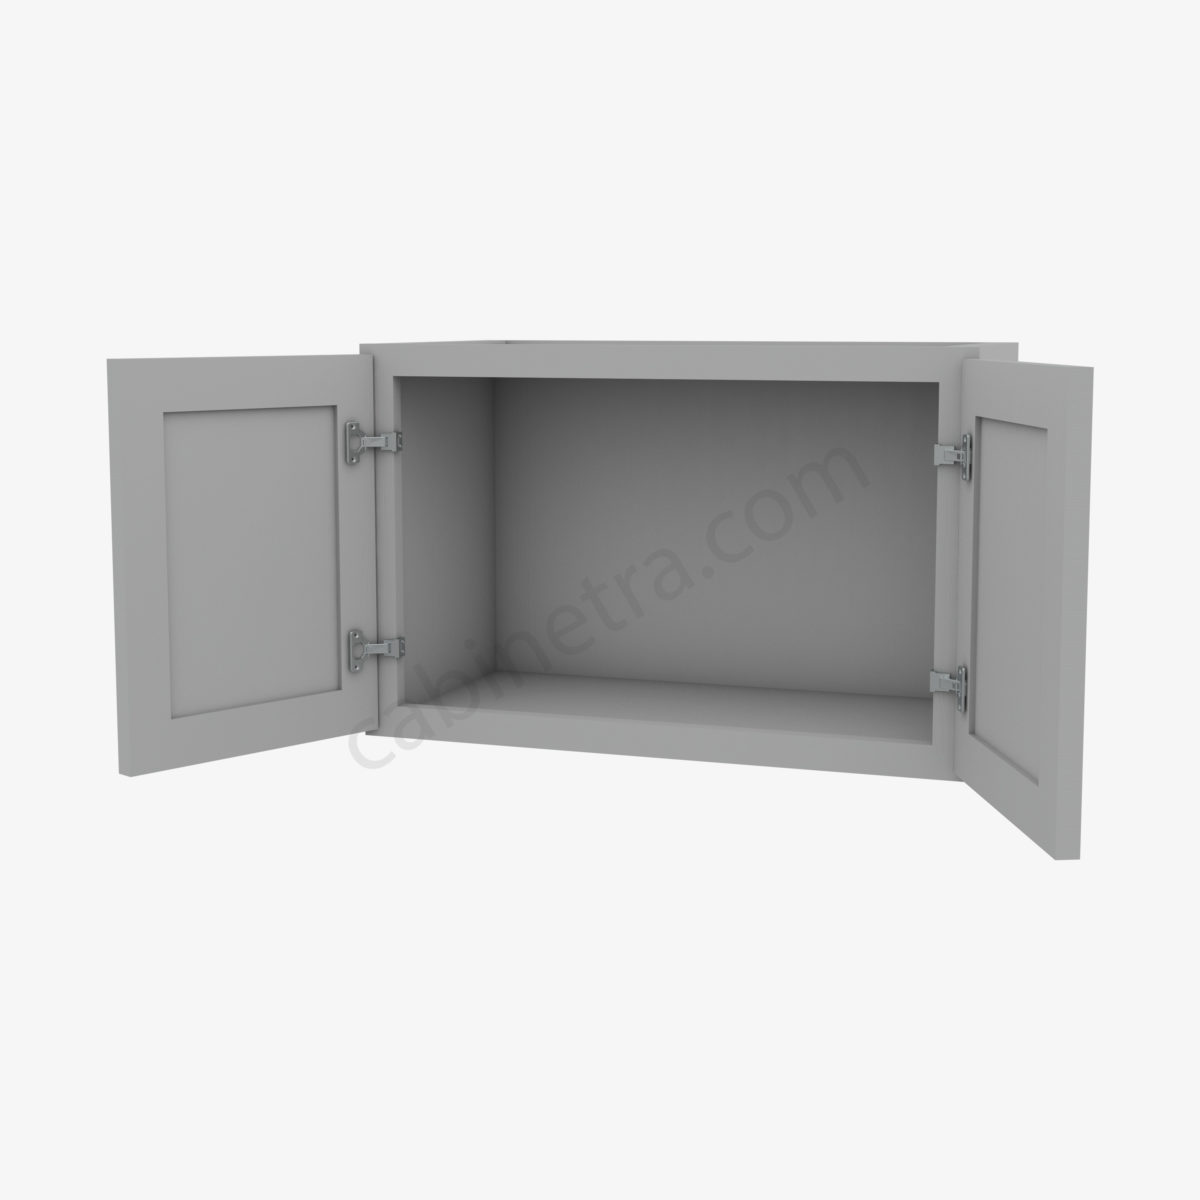 AB W2415B 5 Forevermark Lait Gray Shaker Cabinetra scaled